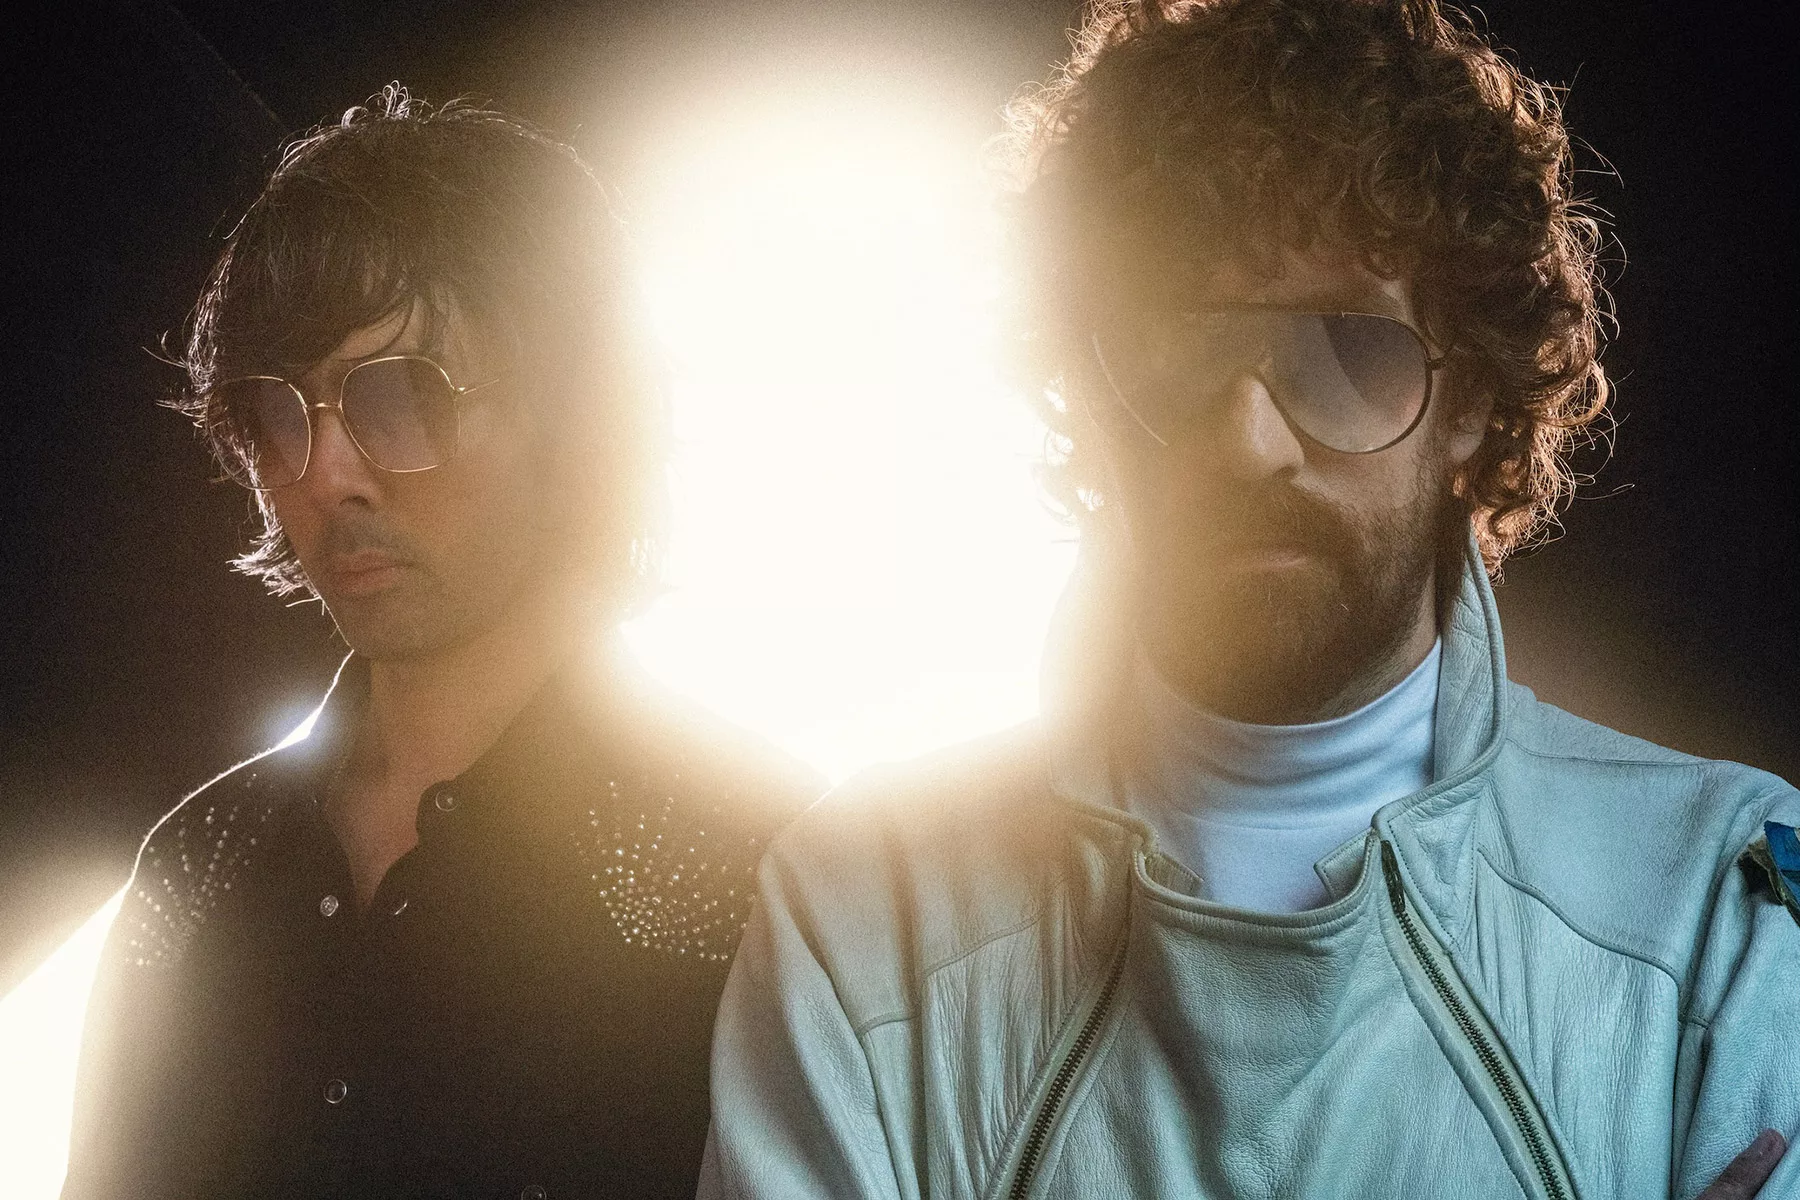 Justice releases new single ‘Saturnine’ from upcoming album ‘Hyperdrama’